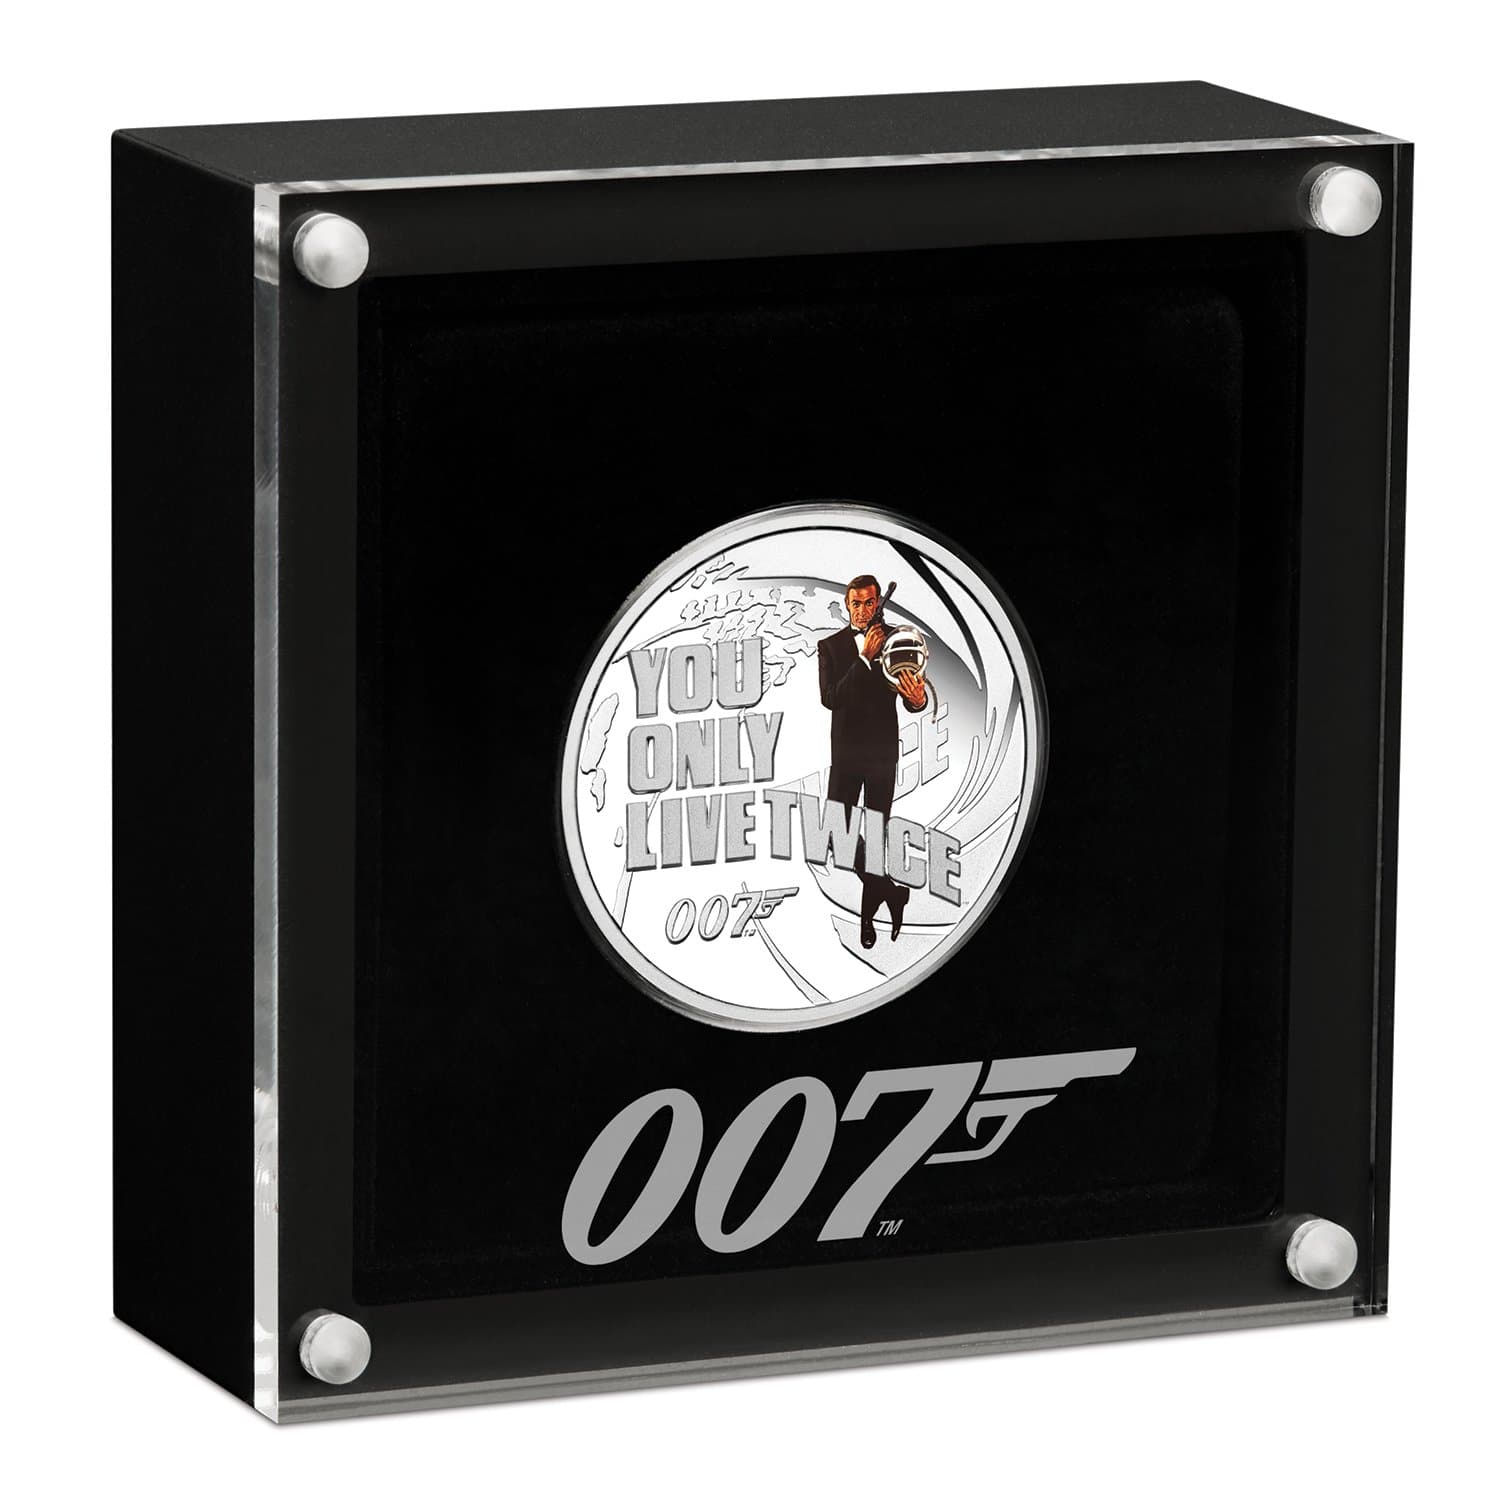 James Bond You Only Live Twice 1/2 oz Silver Proof Coin - By The Perth Mint COIN PERTH MINT 